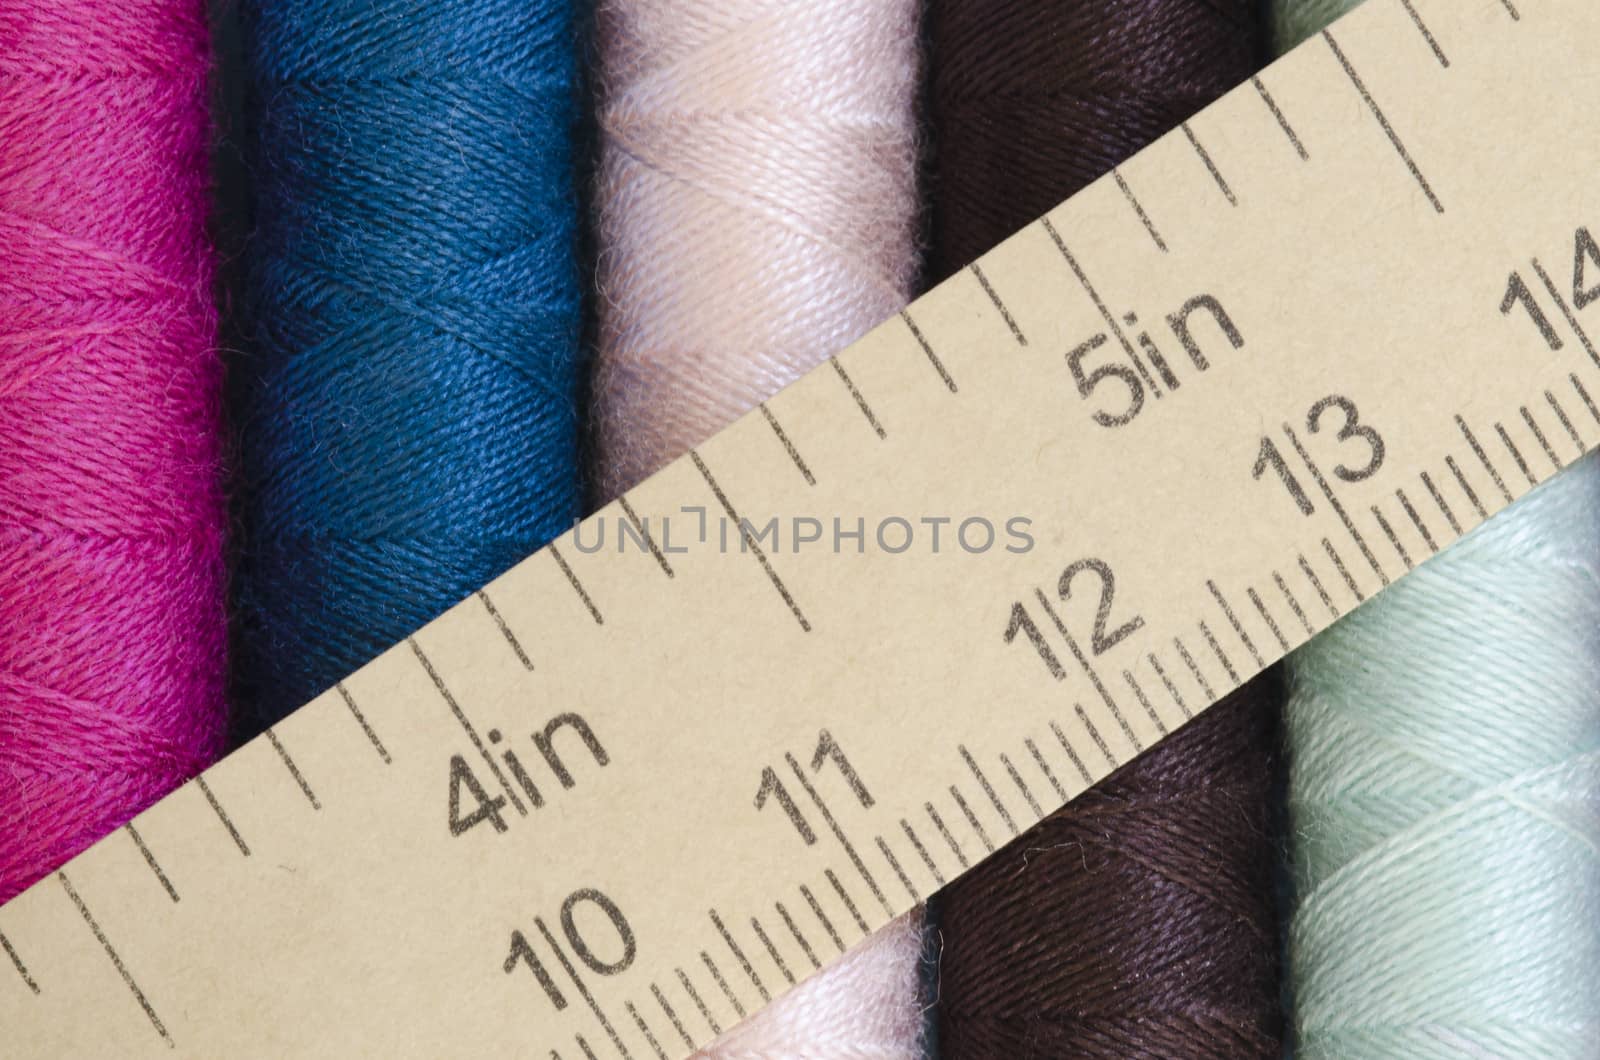 sewing thread and measuring tape background by Grufnar